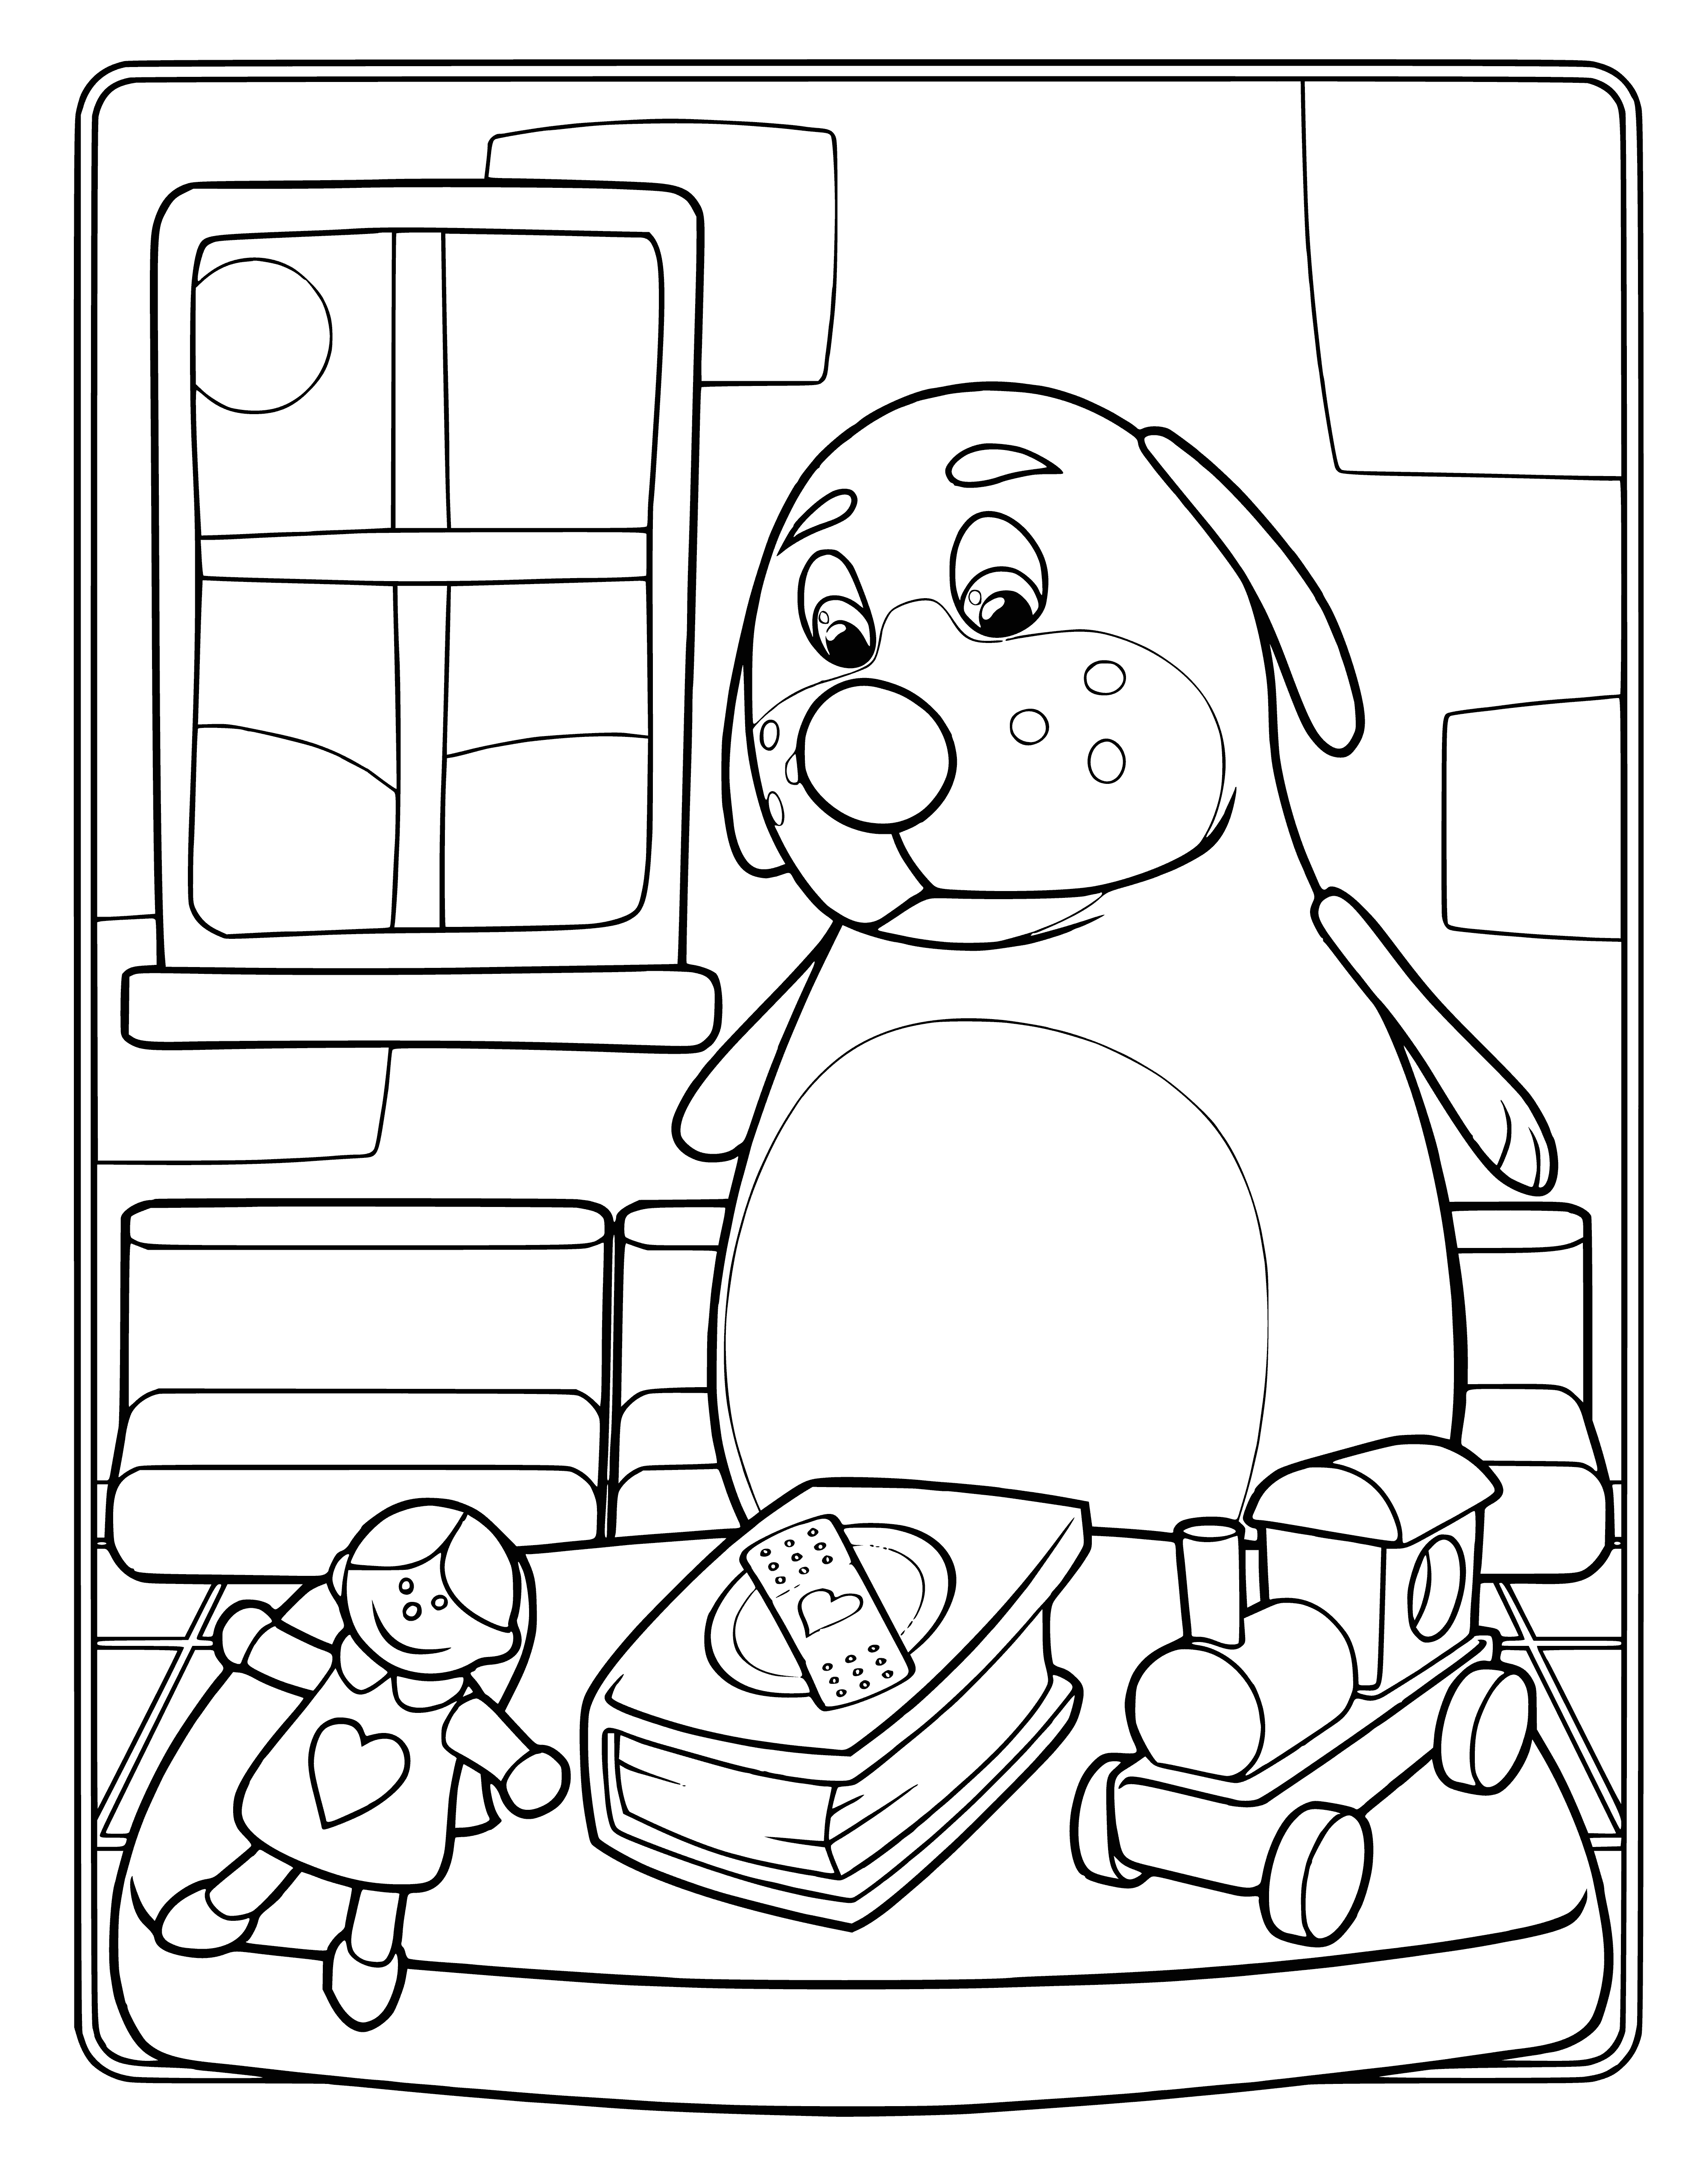 coloring page: White dog with black spots and a blue collar, lying down.